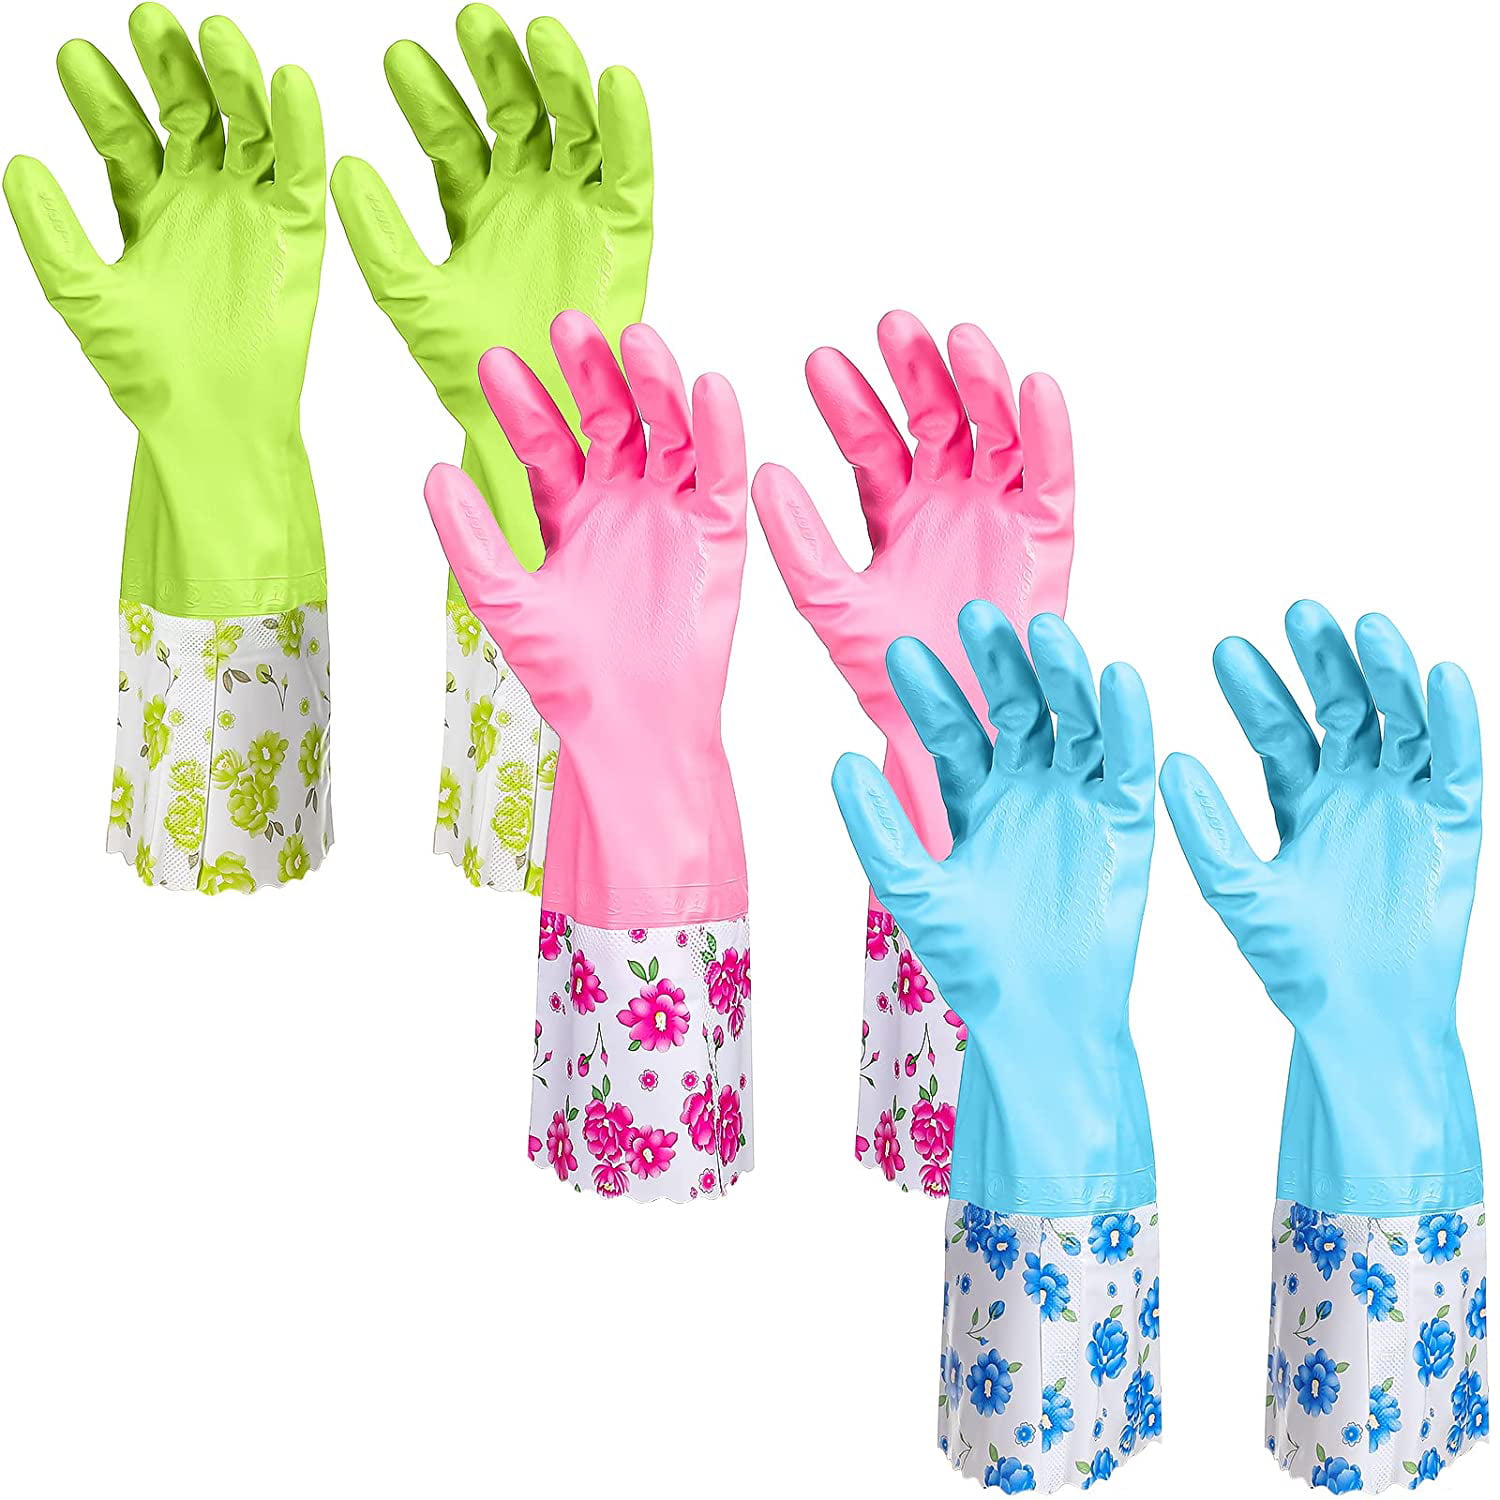 240 Pairs Household Rubber Latex Long Sleeve Gloves Washing Up Dishes Cleaning 